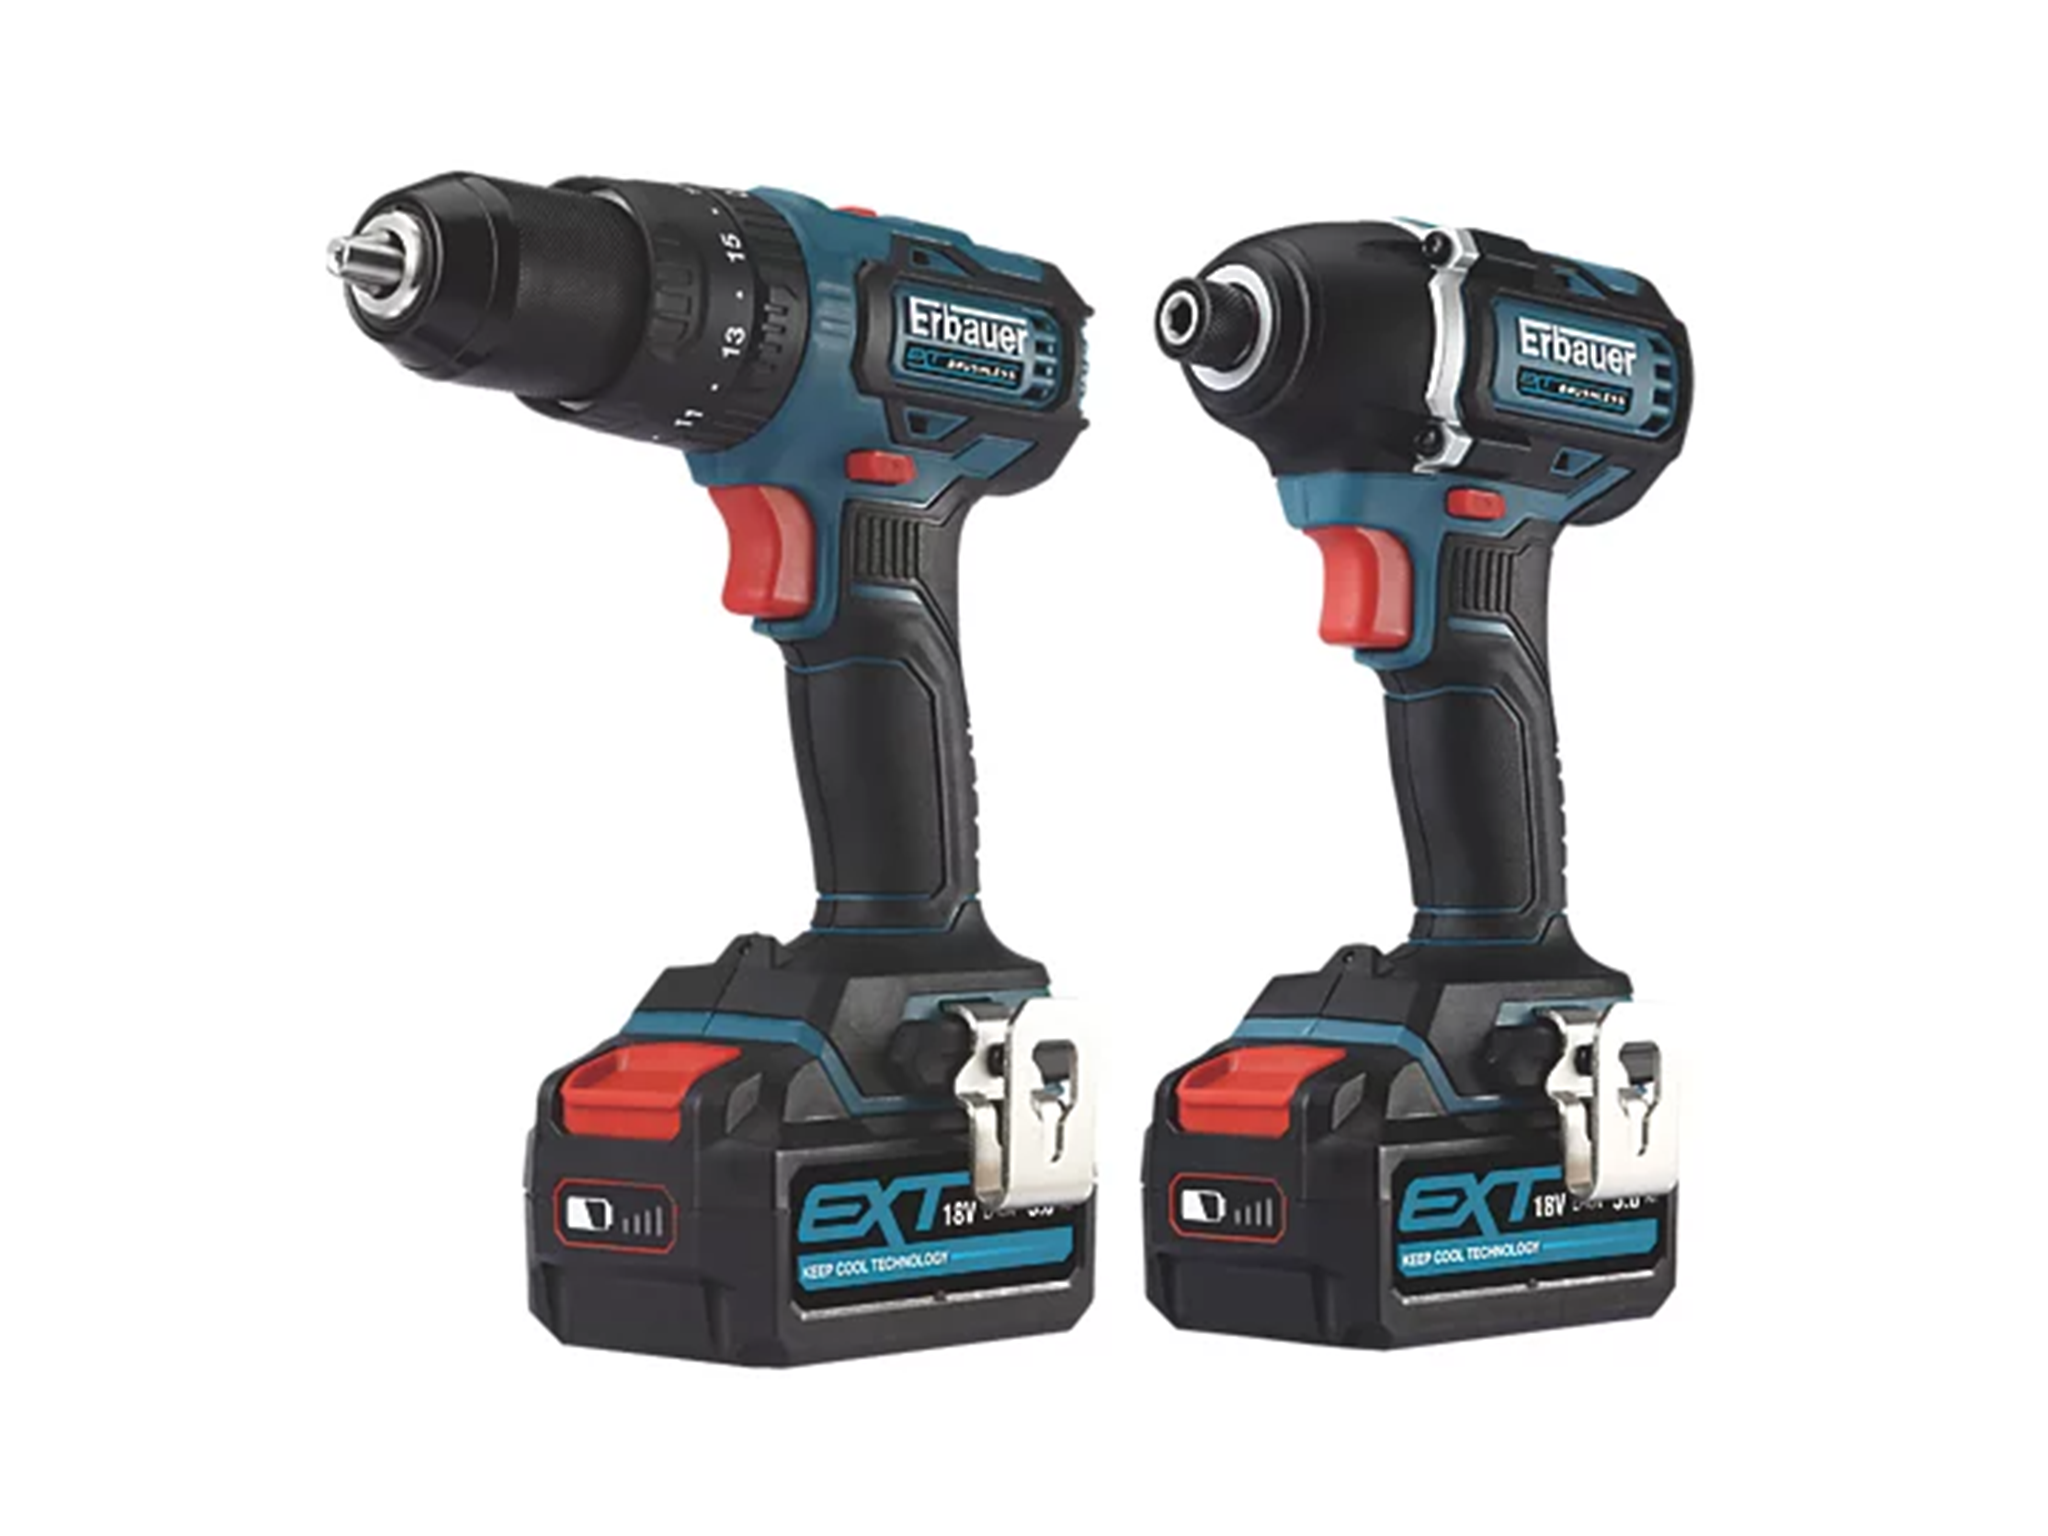 Erbauer cordless twin pack